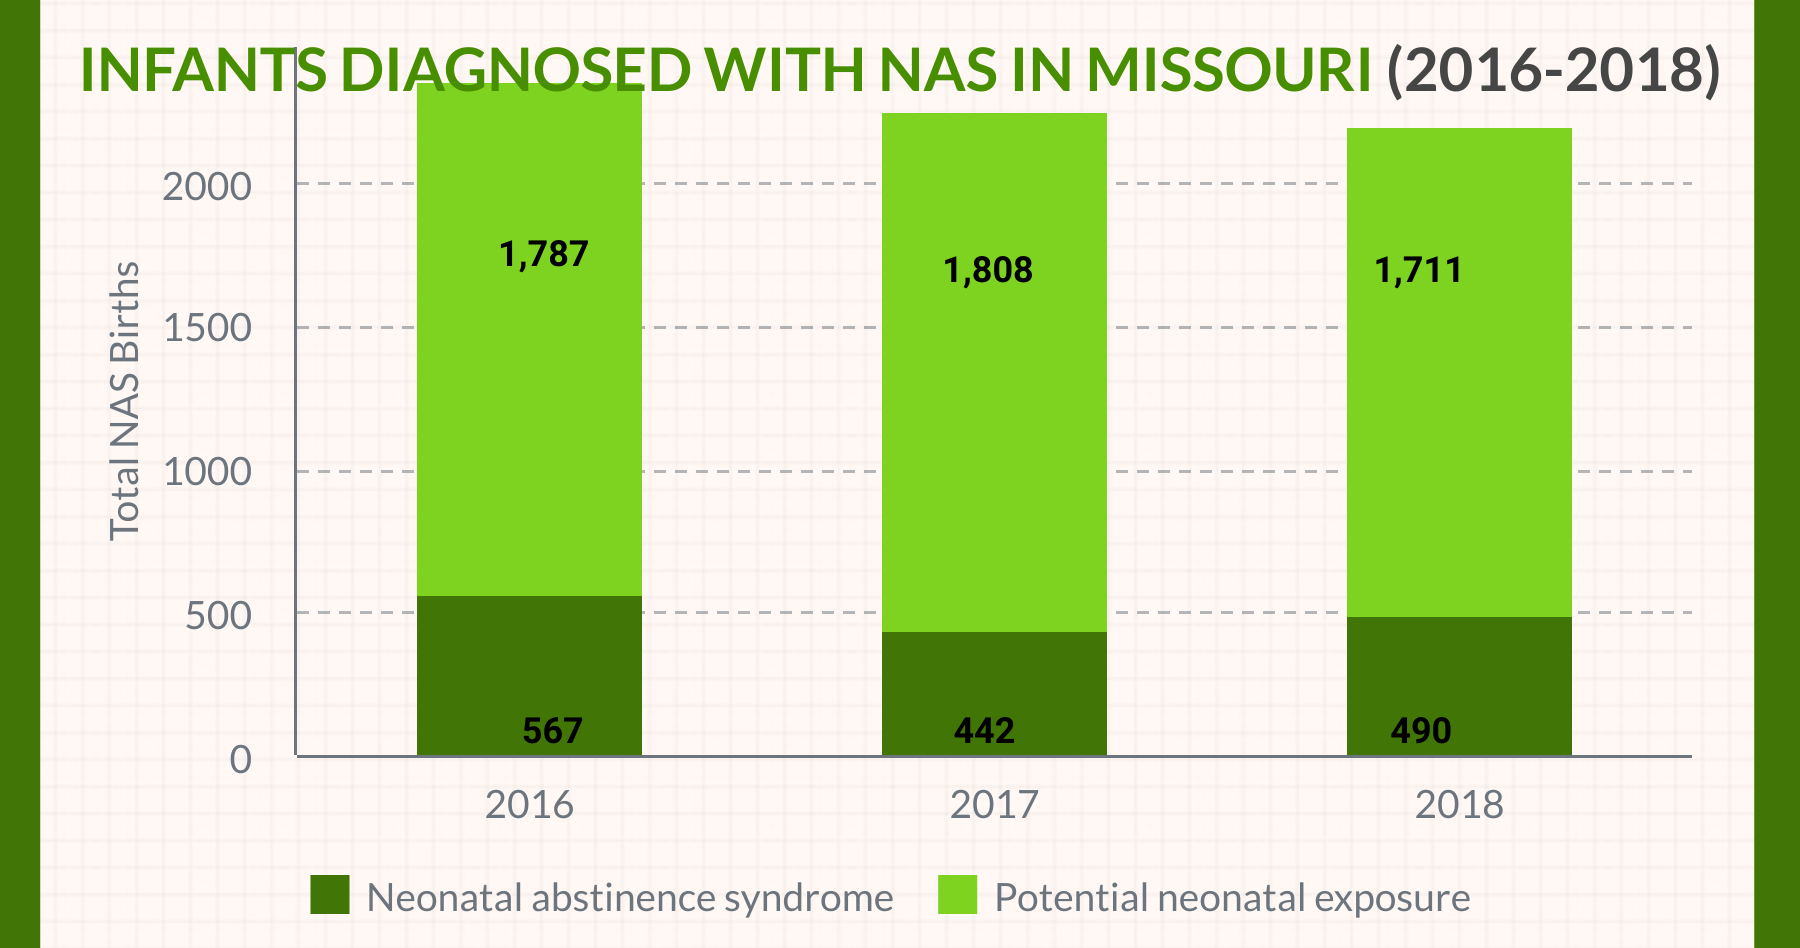 opioid the impact on the future infants diagnosed with NAS in Missouri image